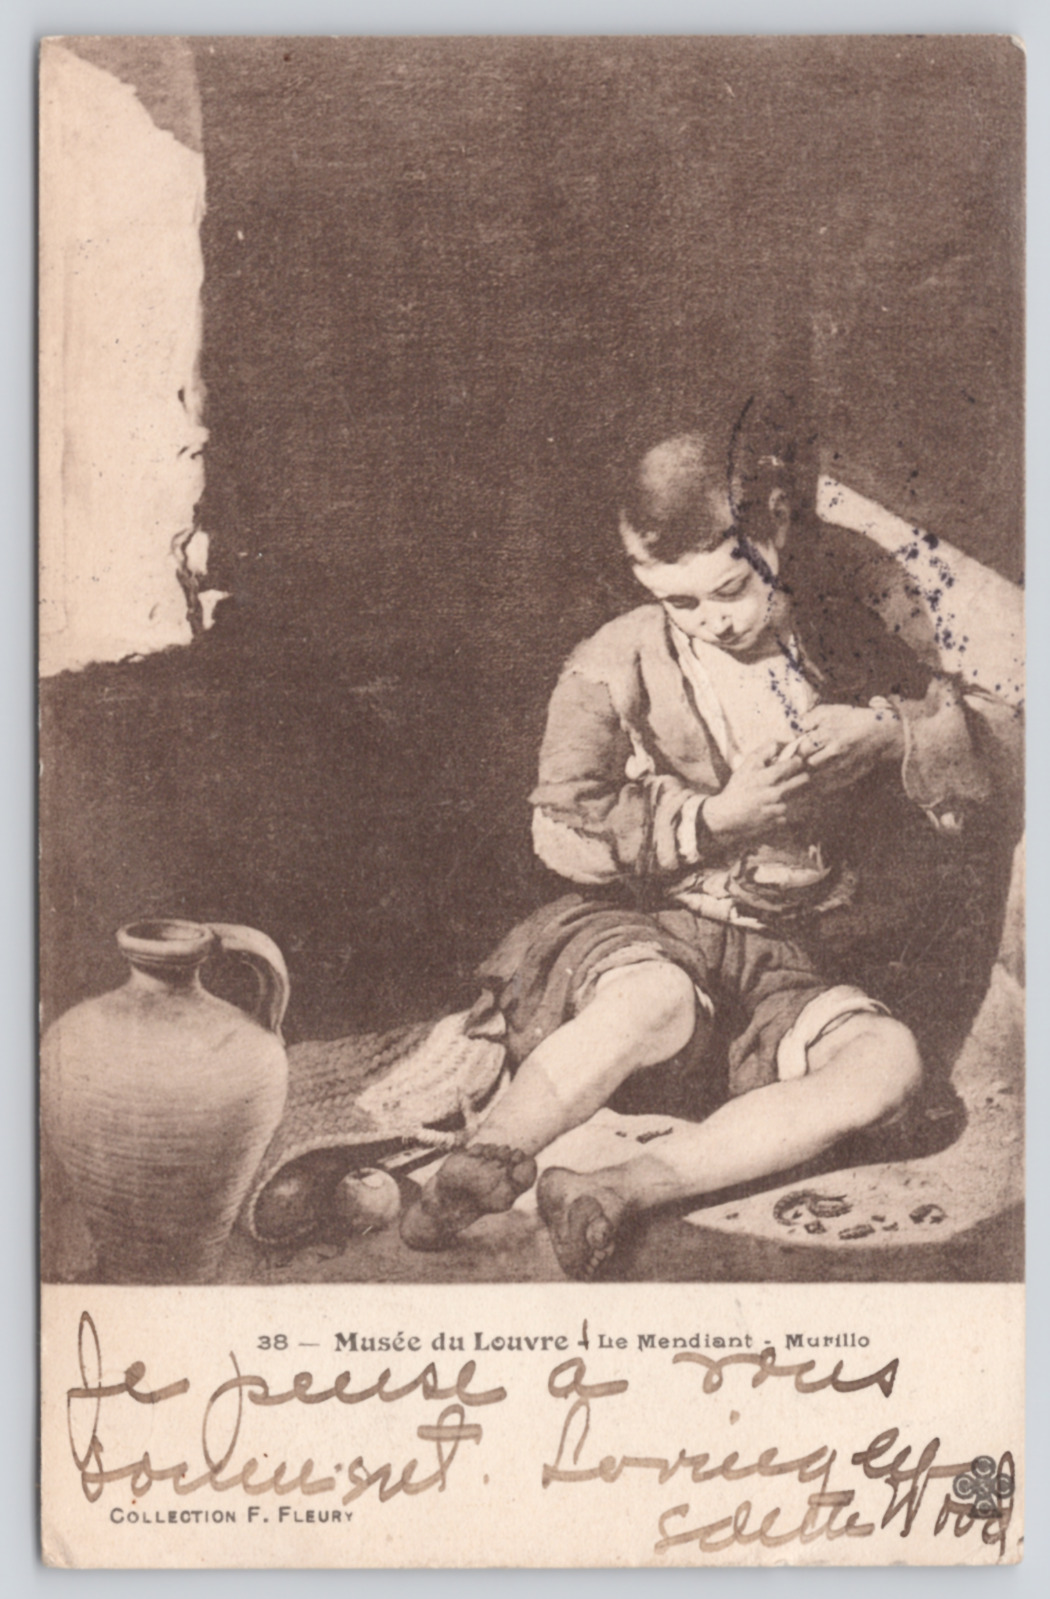 The Young Beggar Art Postcard c1906 by Murillo Louvre Museum, Paris France